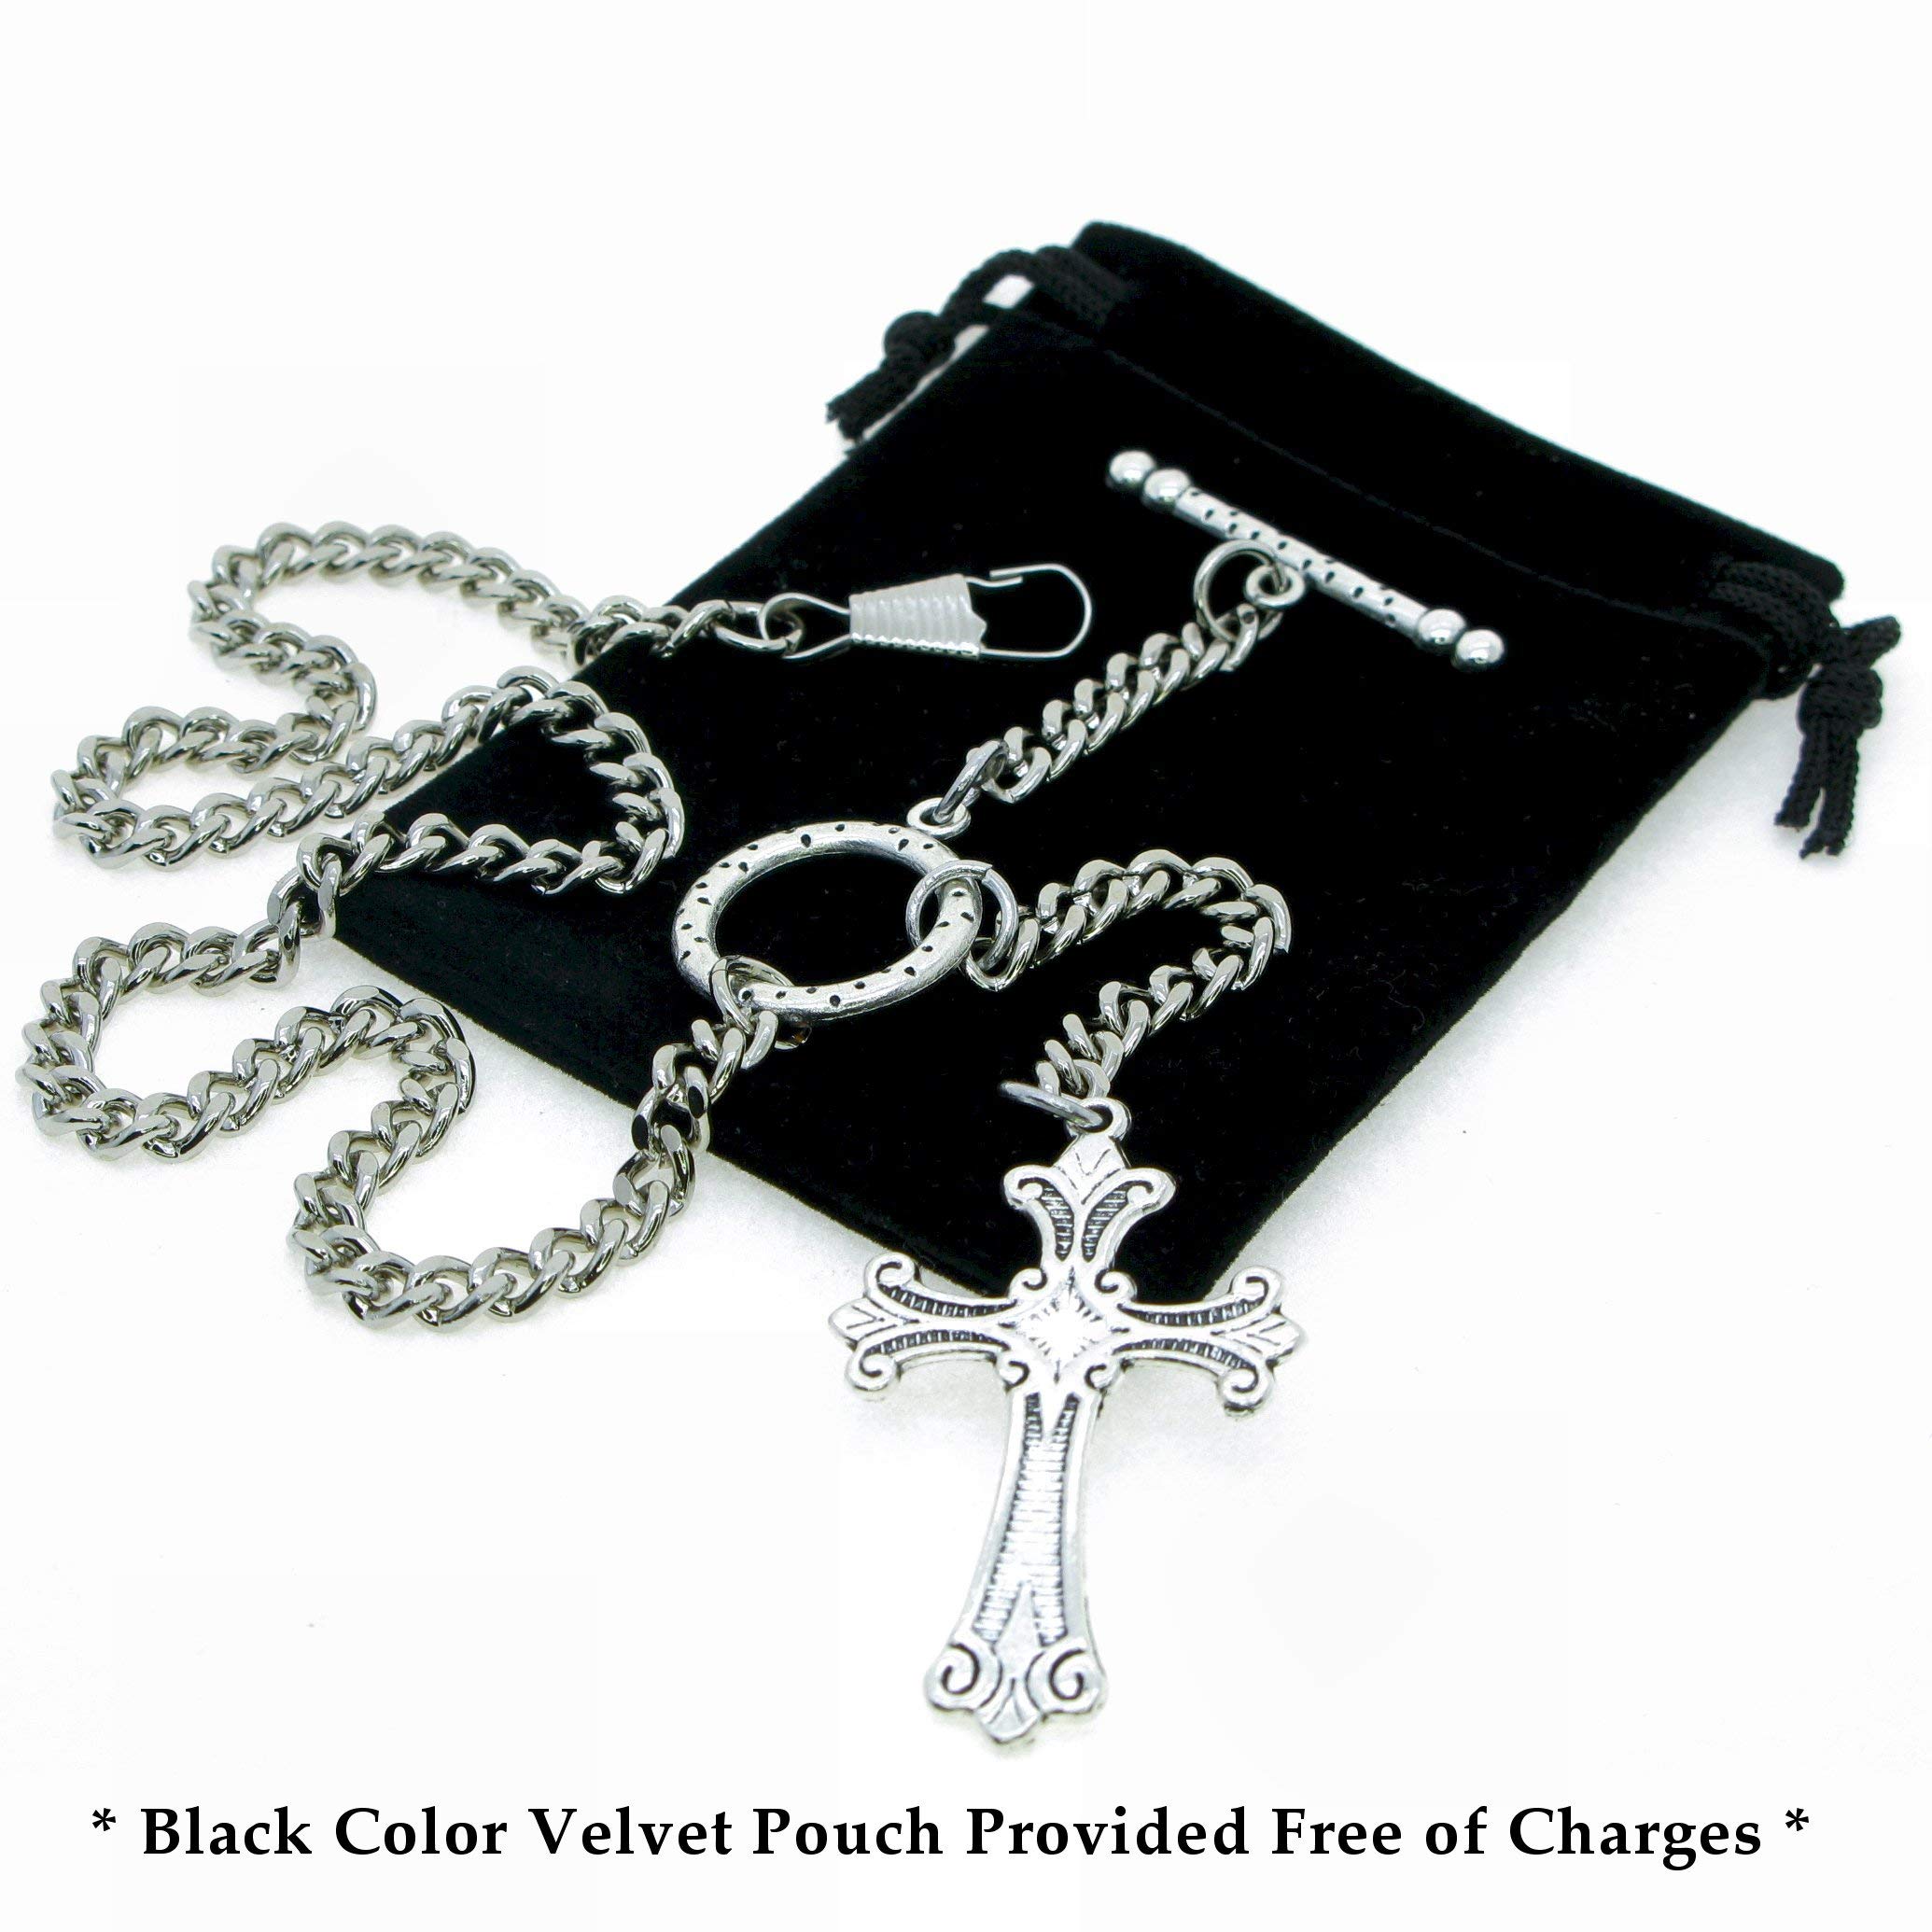 Albert Chain Silver Color Pocket Watch Chains for Men - 2 Ways Usage on Vests & Trousers or Jeans with Religious Cross Design Fob T Bar ACT114